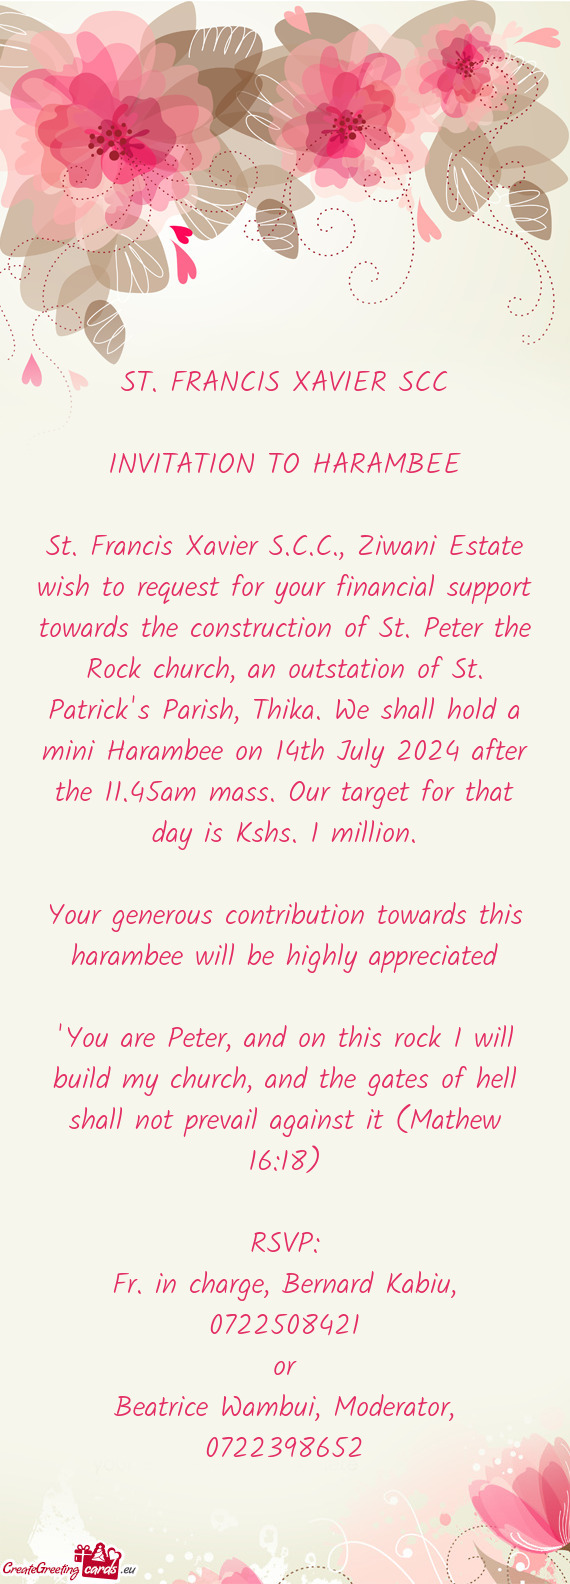 Truction of St. Peter the Rock church, an outstation of St. Patrick